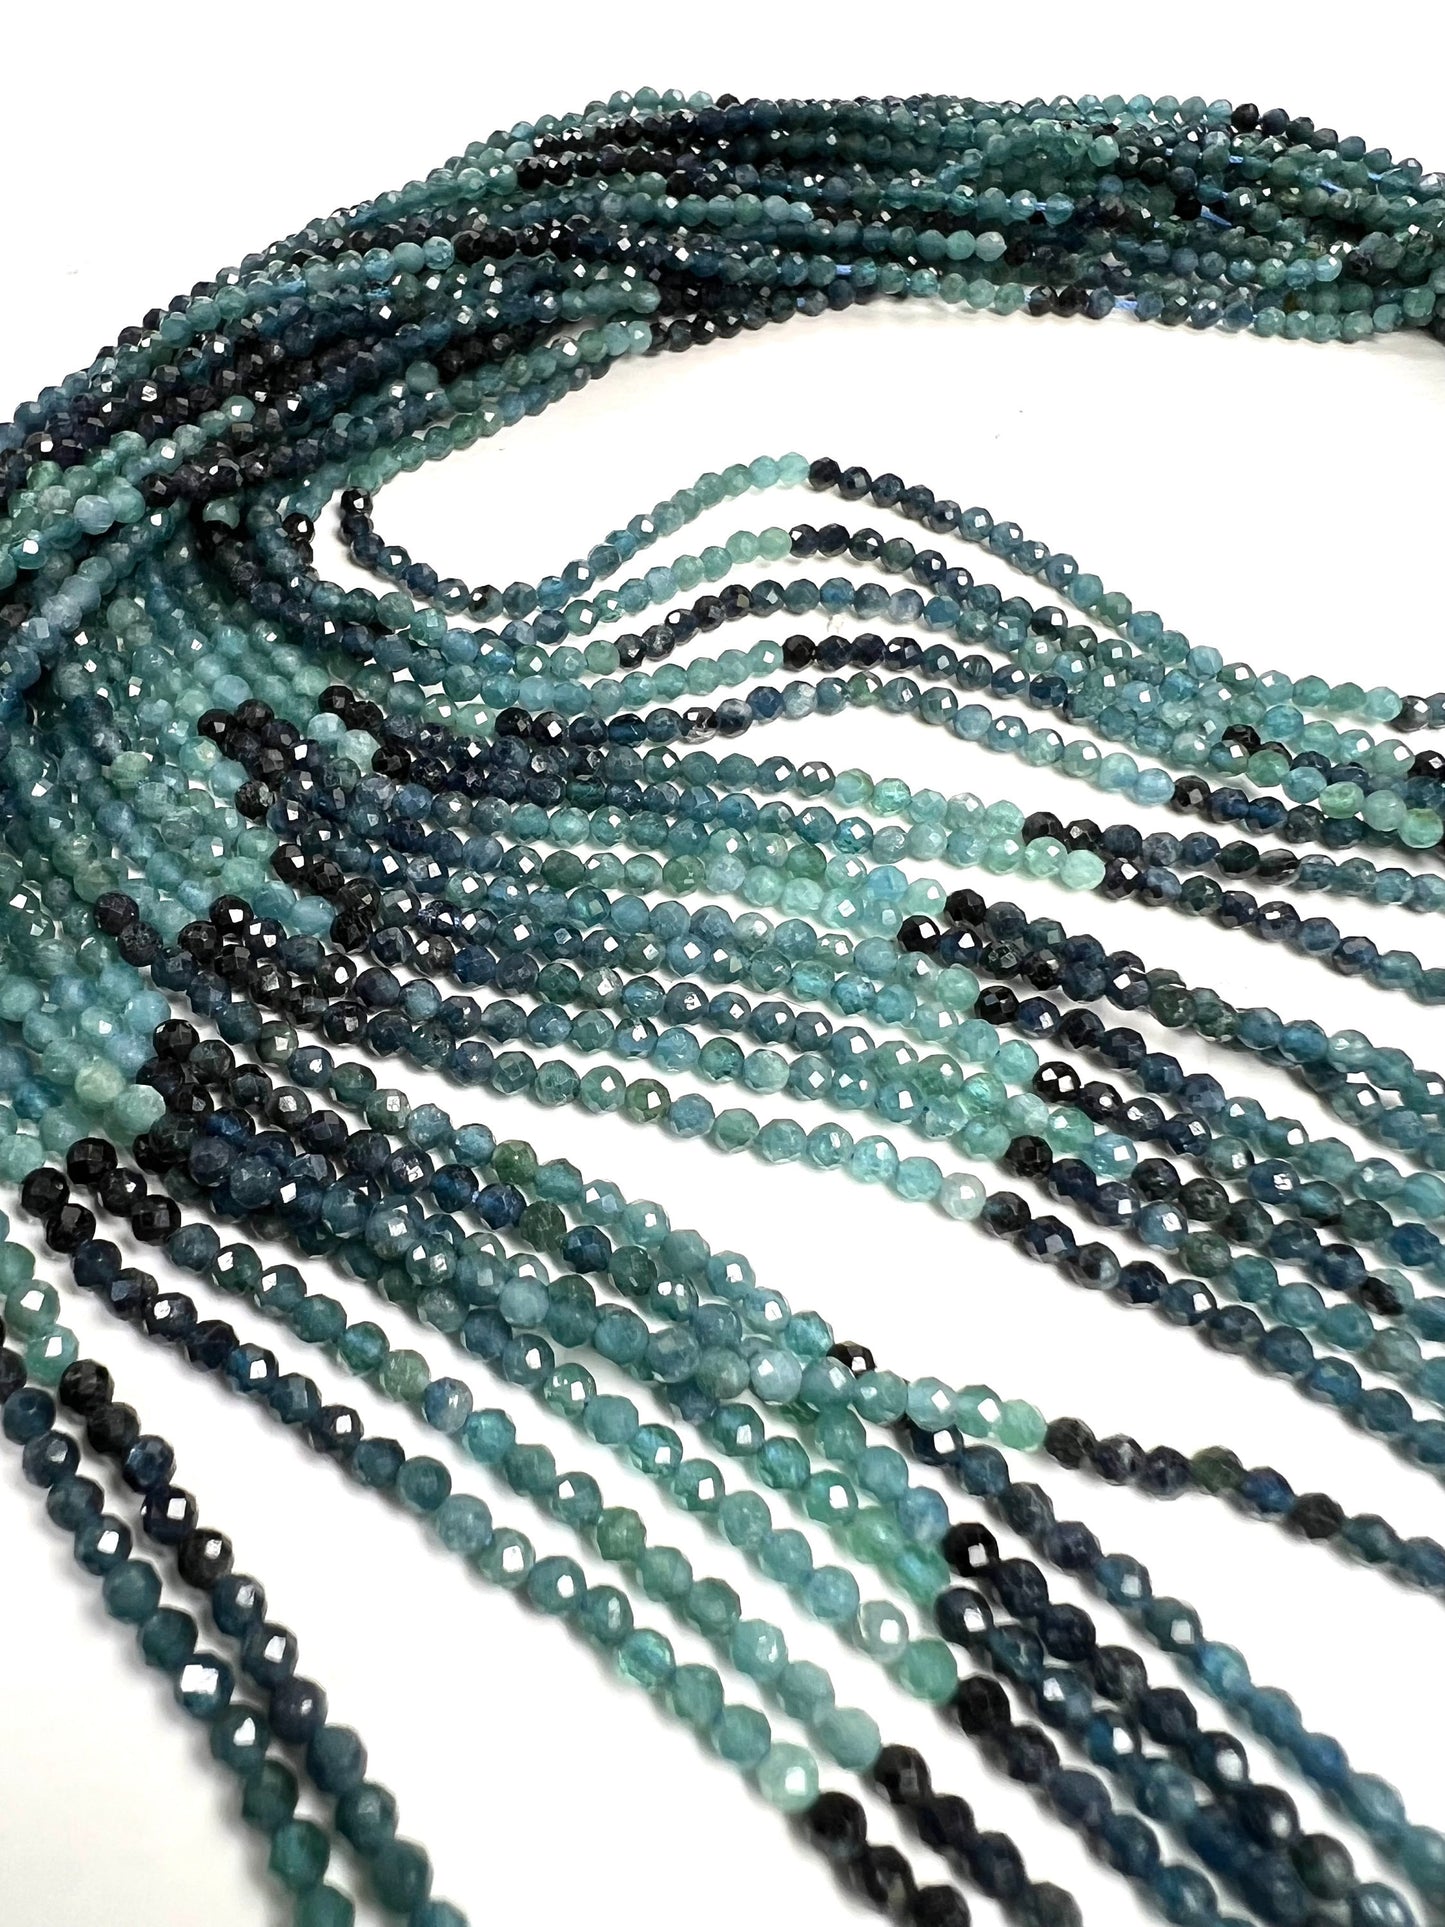 Blue Tourmaline 2.5mm Faceted Round 12" Strand bead, beautiful teal blue shaded natural blue tourmaline jewelry making bead.